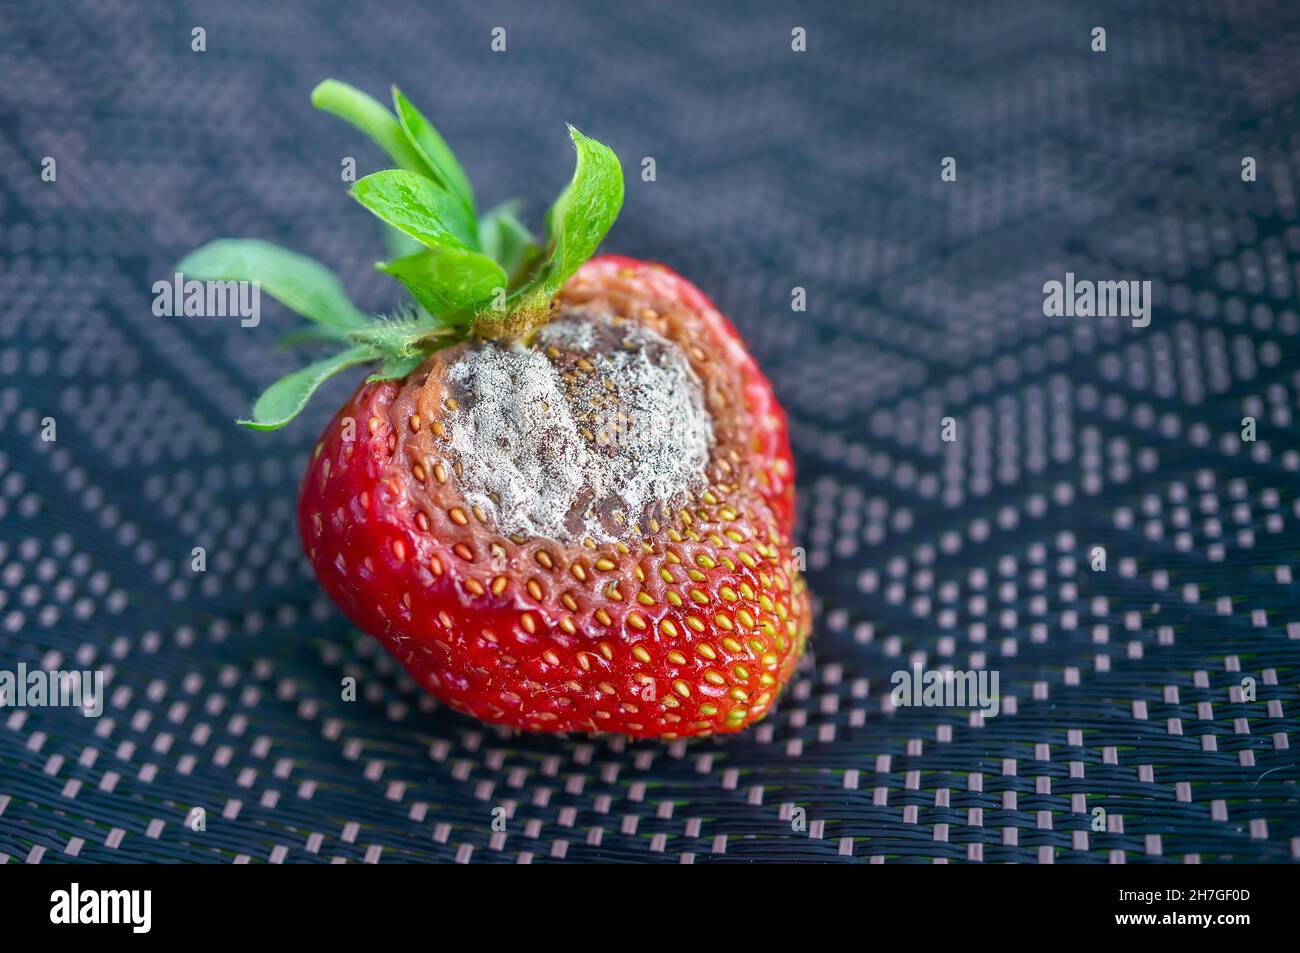 Strawberry berry with rot. Fungal diseases of fruits and other products. Stock Photo